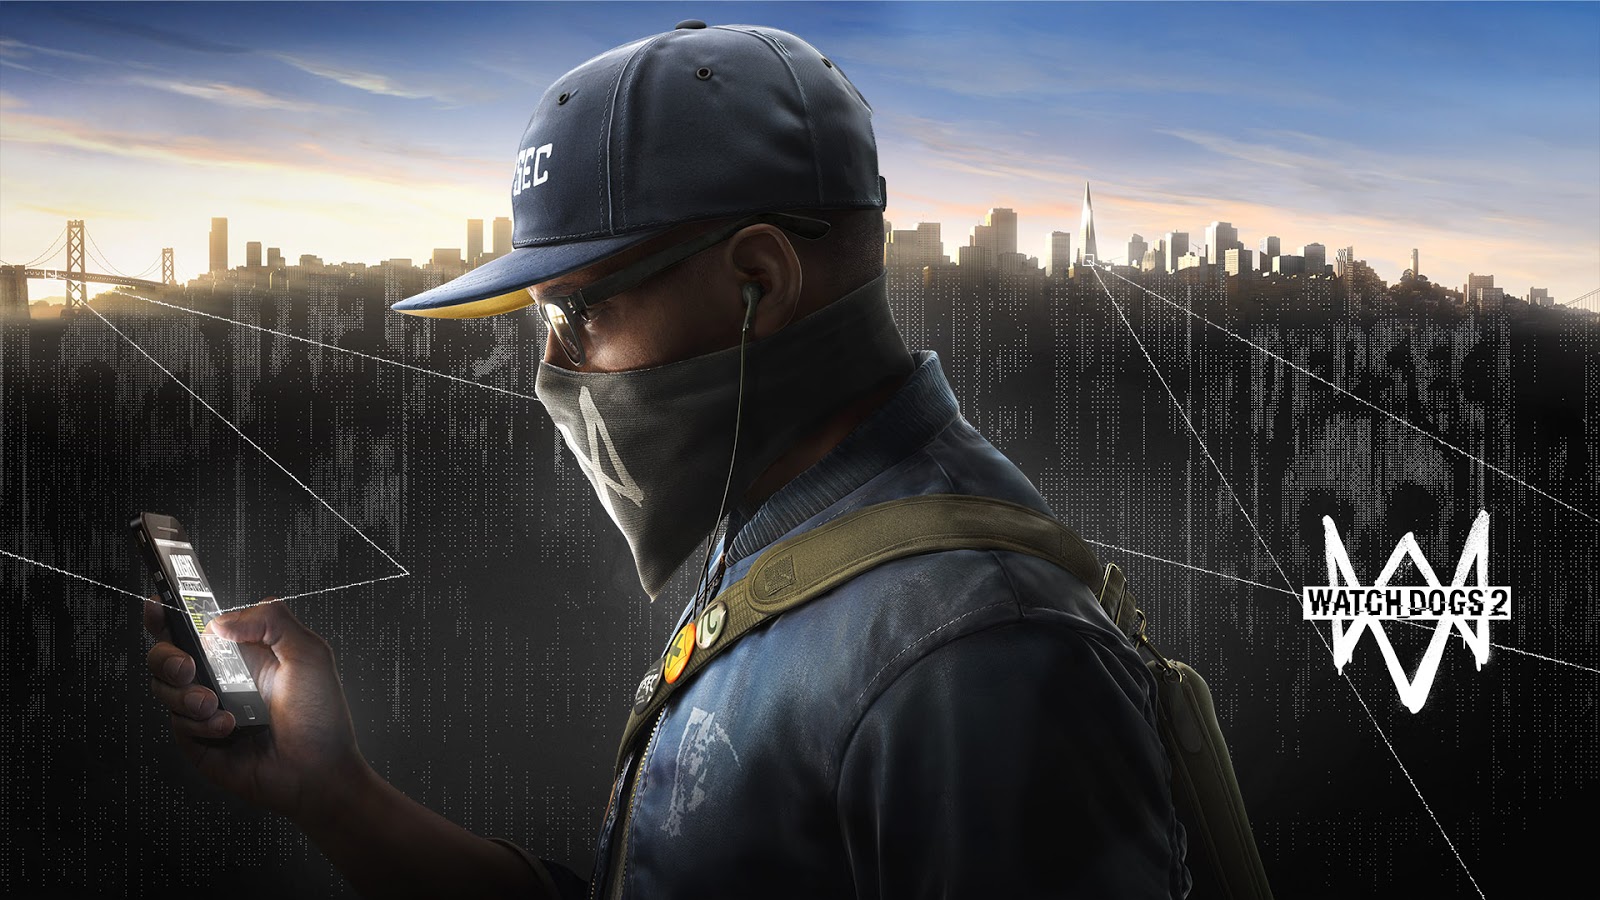 Watch dogs 2 apk obb free download for android 4 0 4